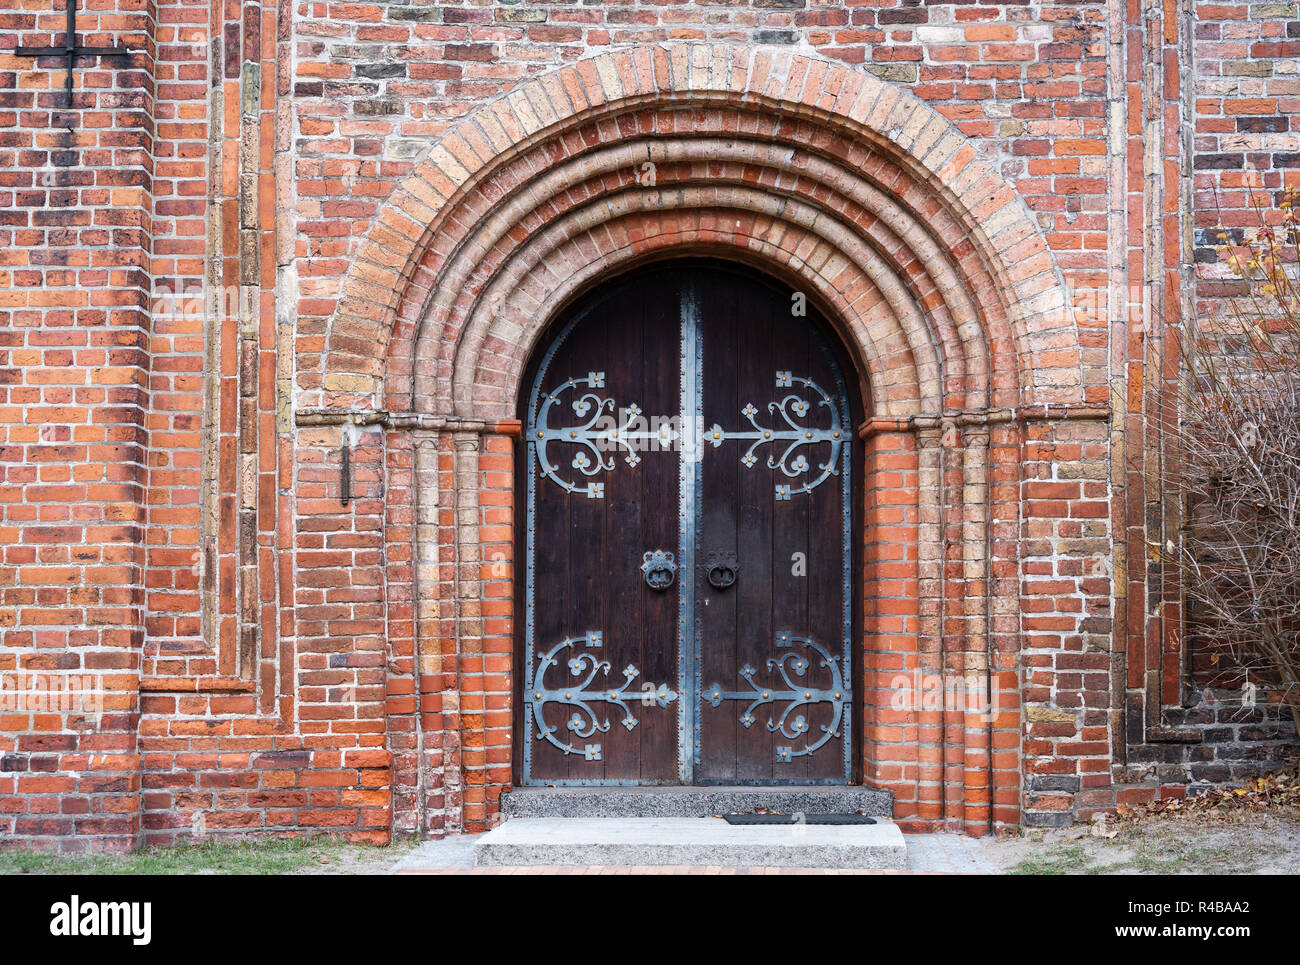 entrance door to the historic ratzeburg cathedral in typical brick architecture in north germany Stock Photo